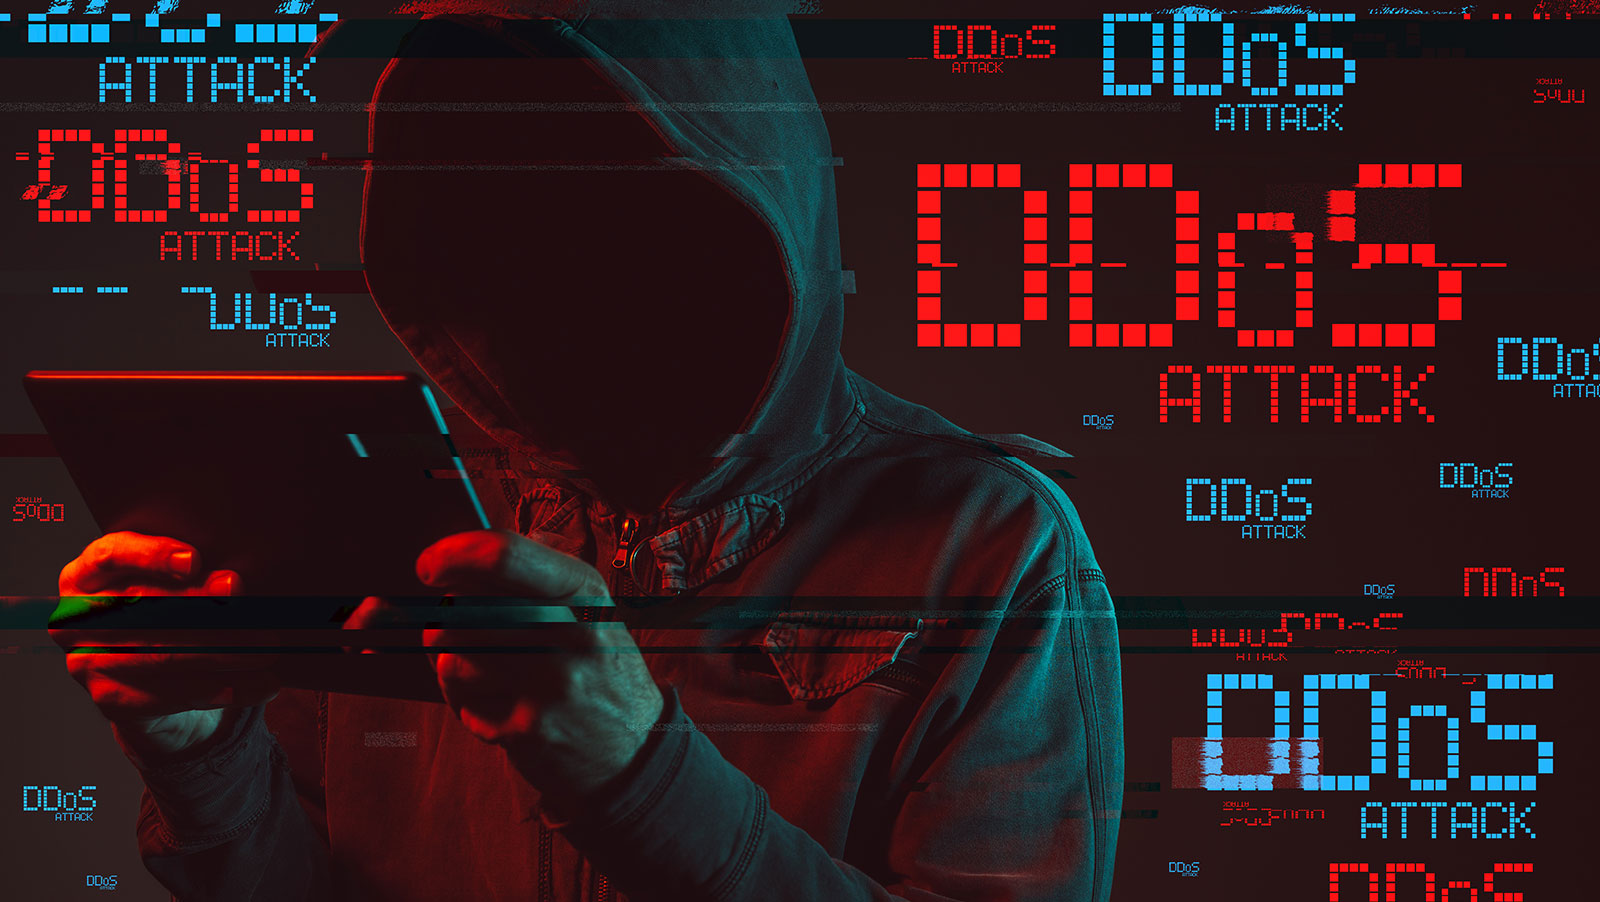 Anarchy at Americas Cardroom as DDoS attacks continue into the week